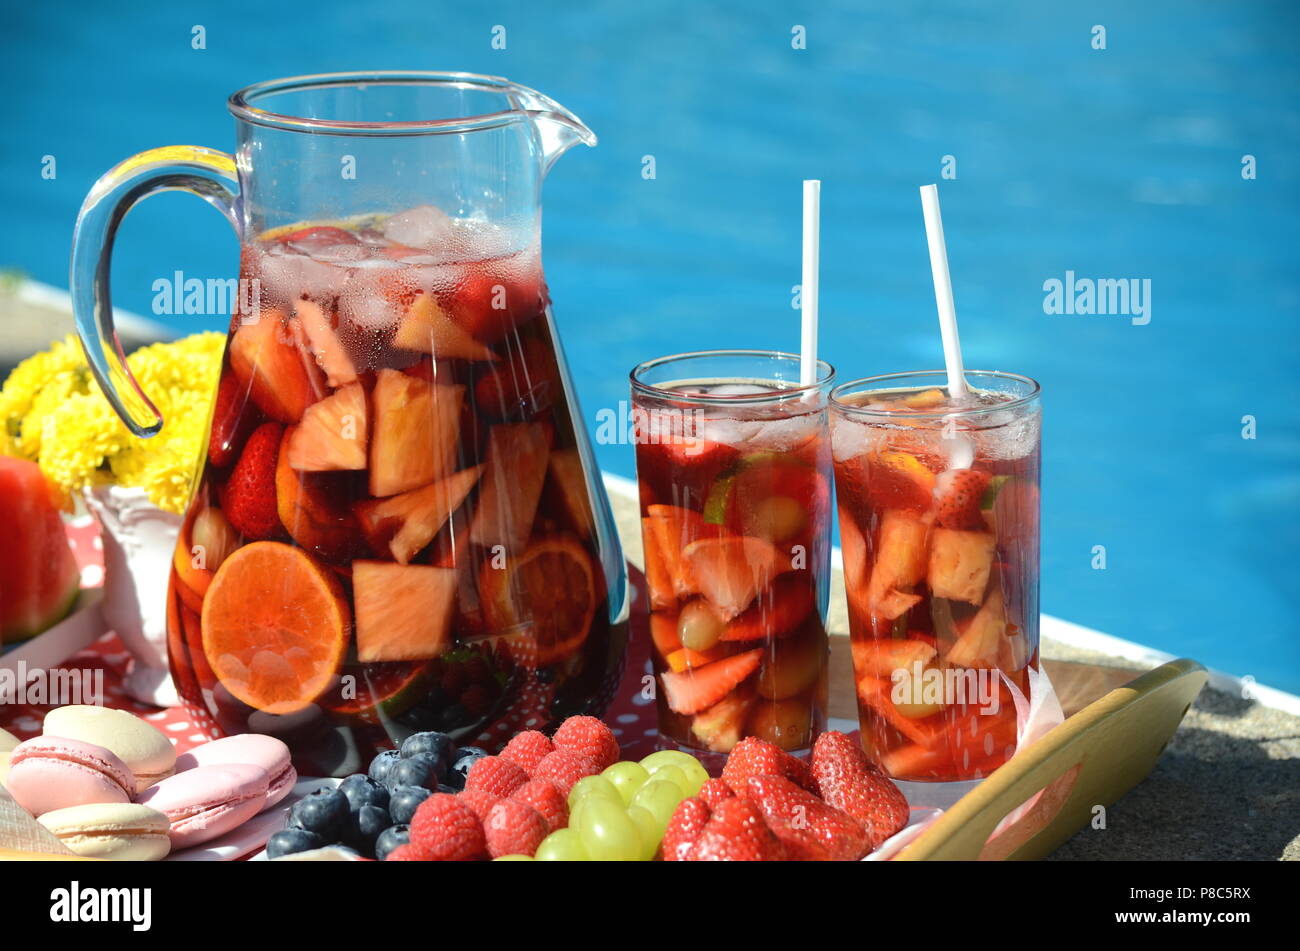 https://c8.alamy.com/comp/P8C5RX/pool-party-with-sangria-pitcher-fruit-cocktails-and-refreshments-by-the-swimming-pool-summer-lifestyle-topical-vacation-fun-and-relaxation-theme-P8C5RX.jpg